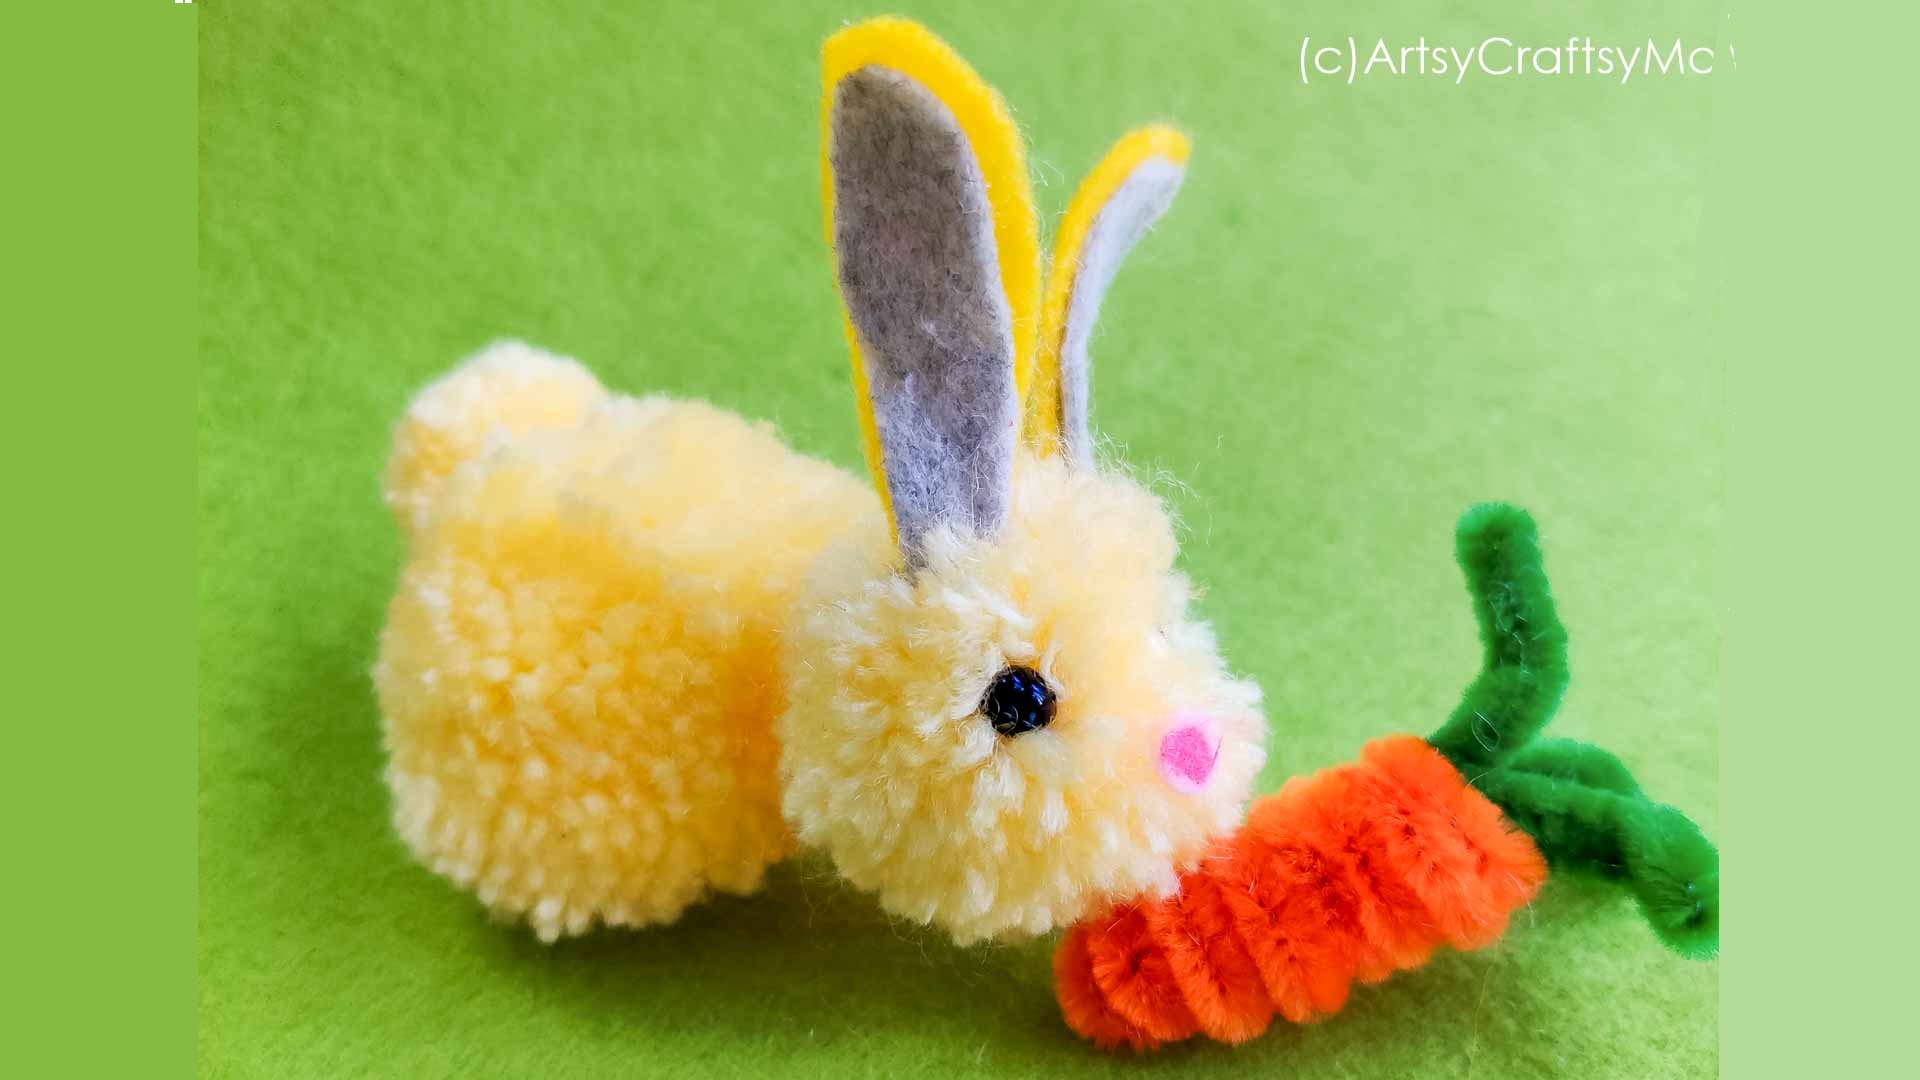 20 Simple and Colorful Yarn Crafts for Kids